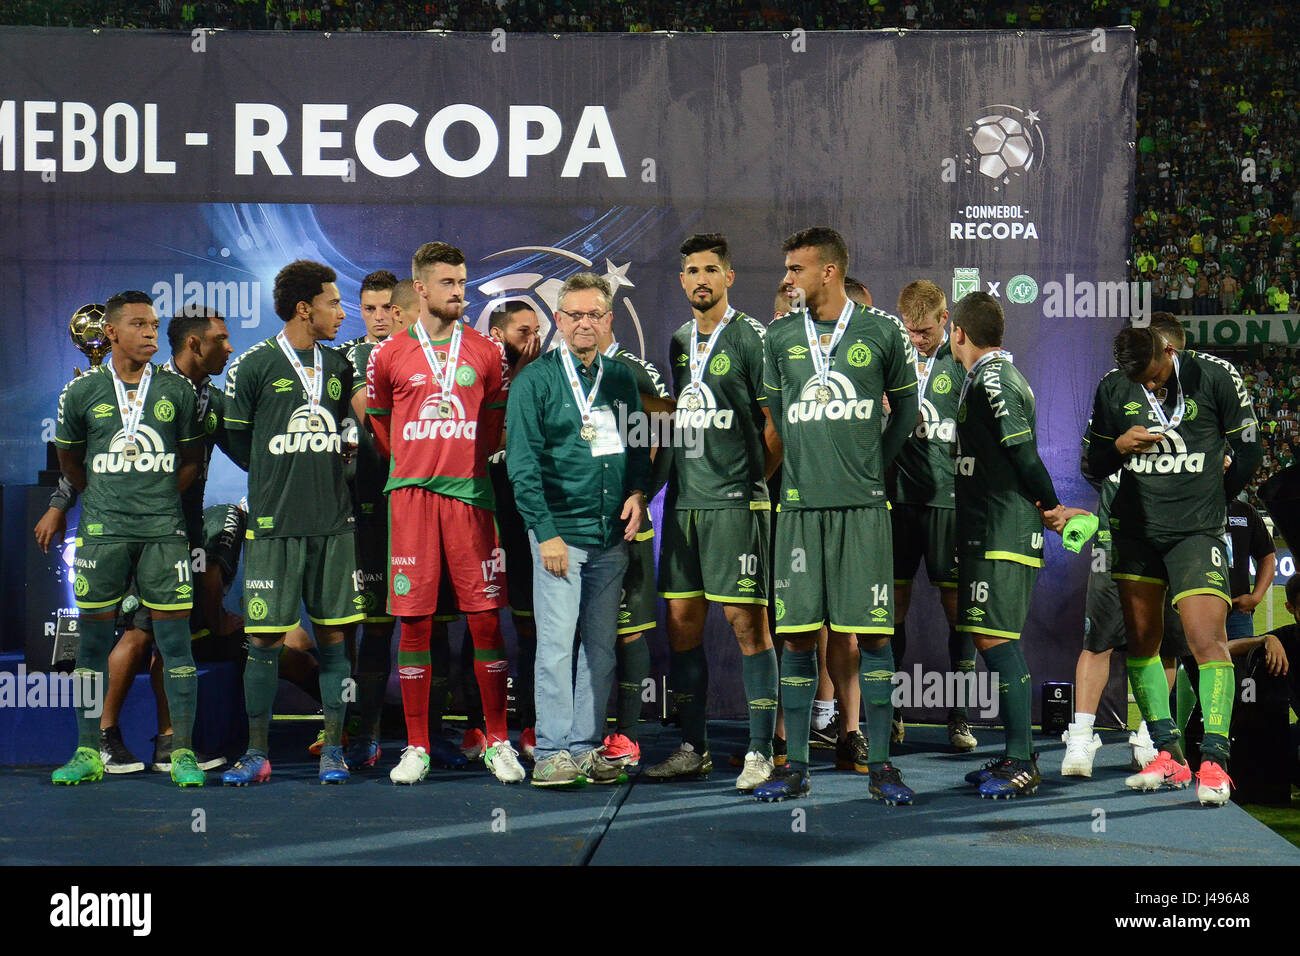 Medellin, Colombia. 10th May, 2017. Chapecoense take second place after the Recopa Sudamericana match between Atletico Nacional of Colombia and Chapecoense of Brazil in Medellin, Colombia, 10 May 2017. Photo: Luis Benavides/dpa/Alamy Live News Stock Photo